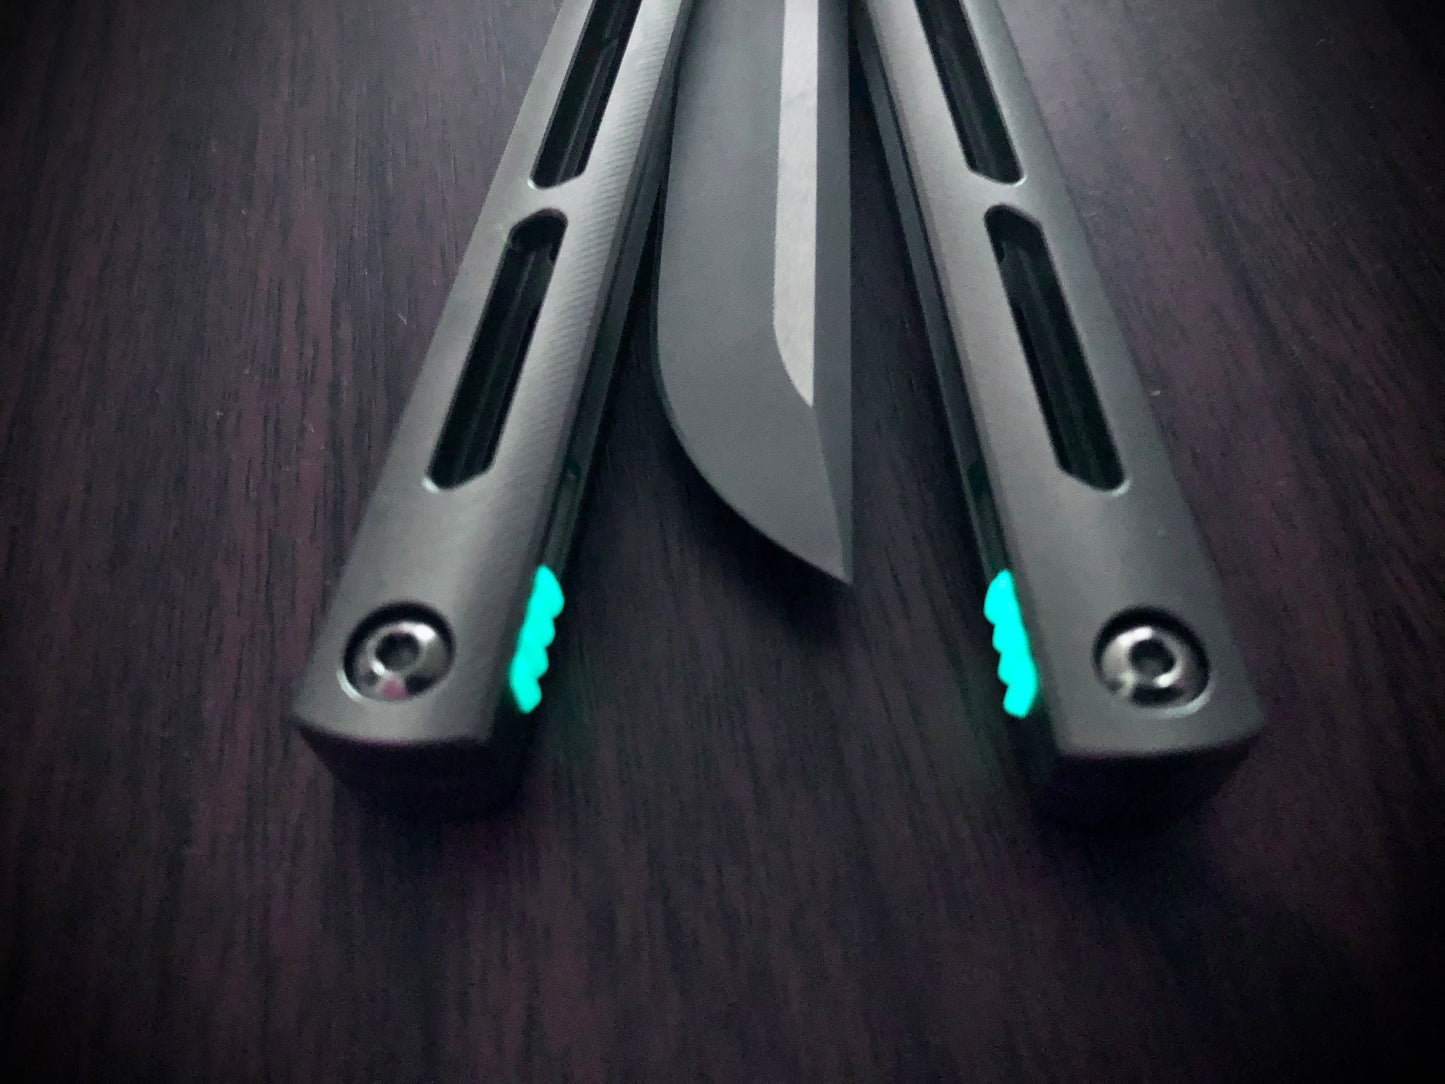 Modify the grip of your Squid Industries Tsunami balisong with this custom-made Zippy mod that adds jimping to the inside of the handles. This polyurethane jimping mod can also be used to add a pop of color or mark the bite handle.